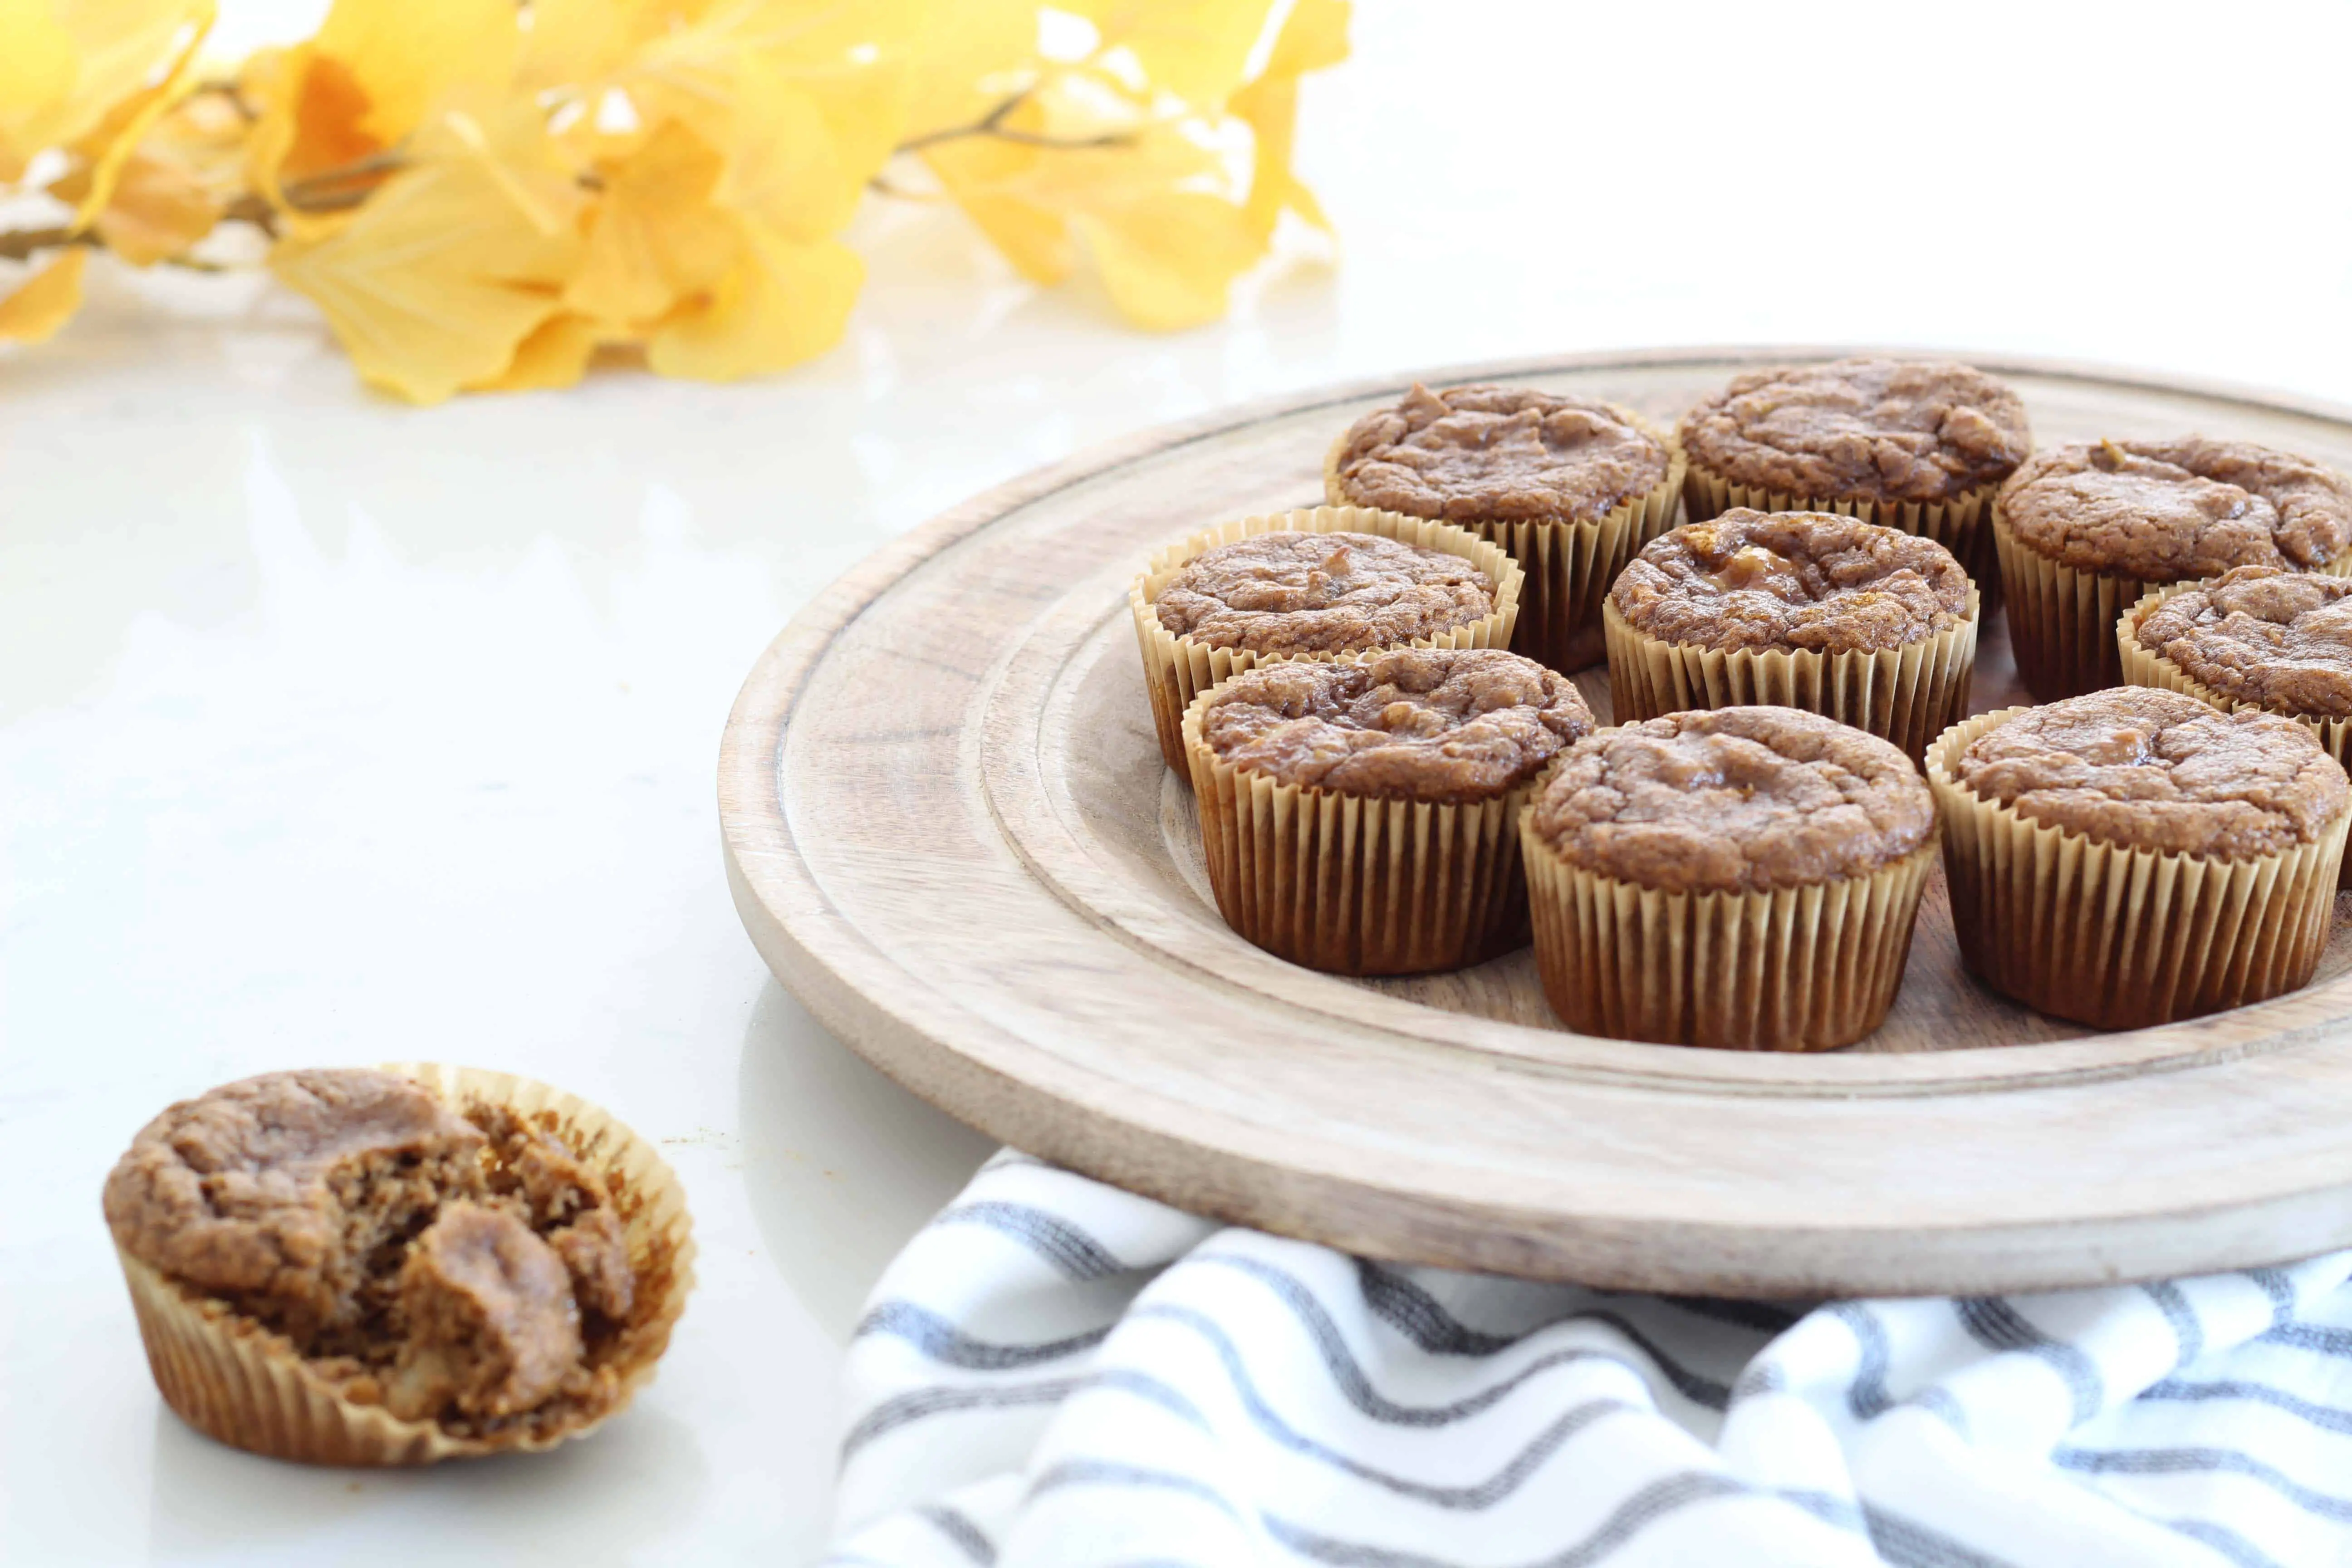 gluten free, paleo pumpkin spice muffins with yellow gingko leaves